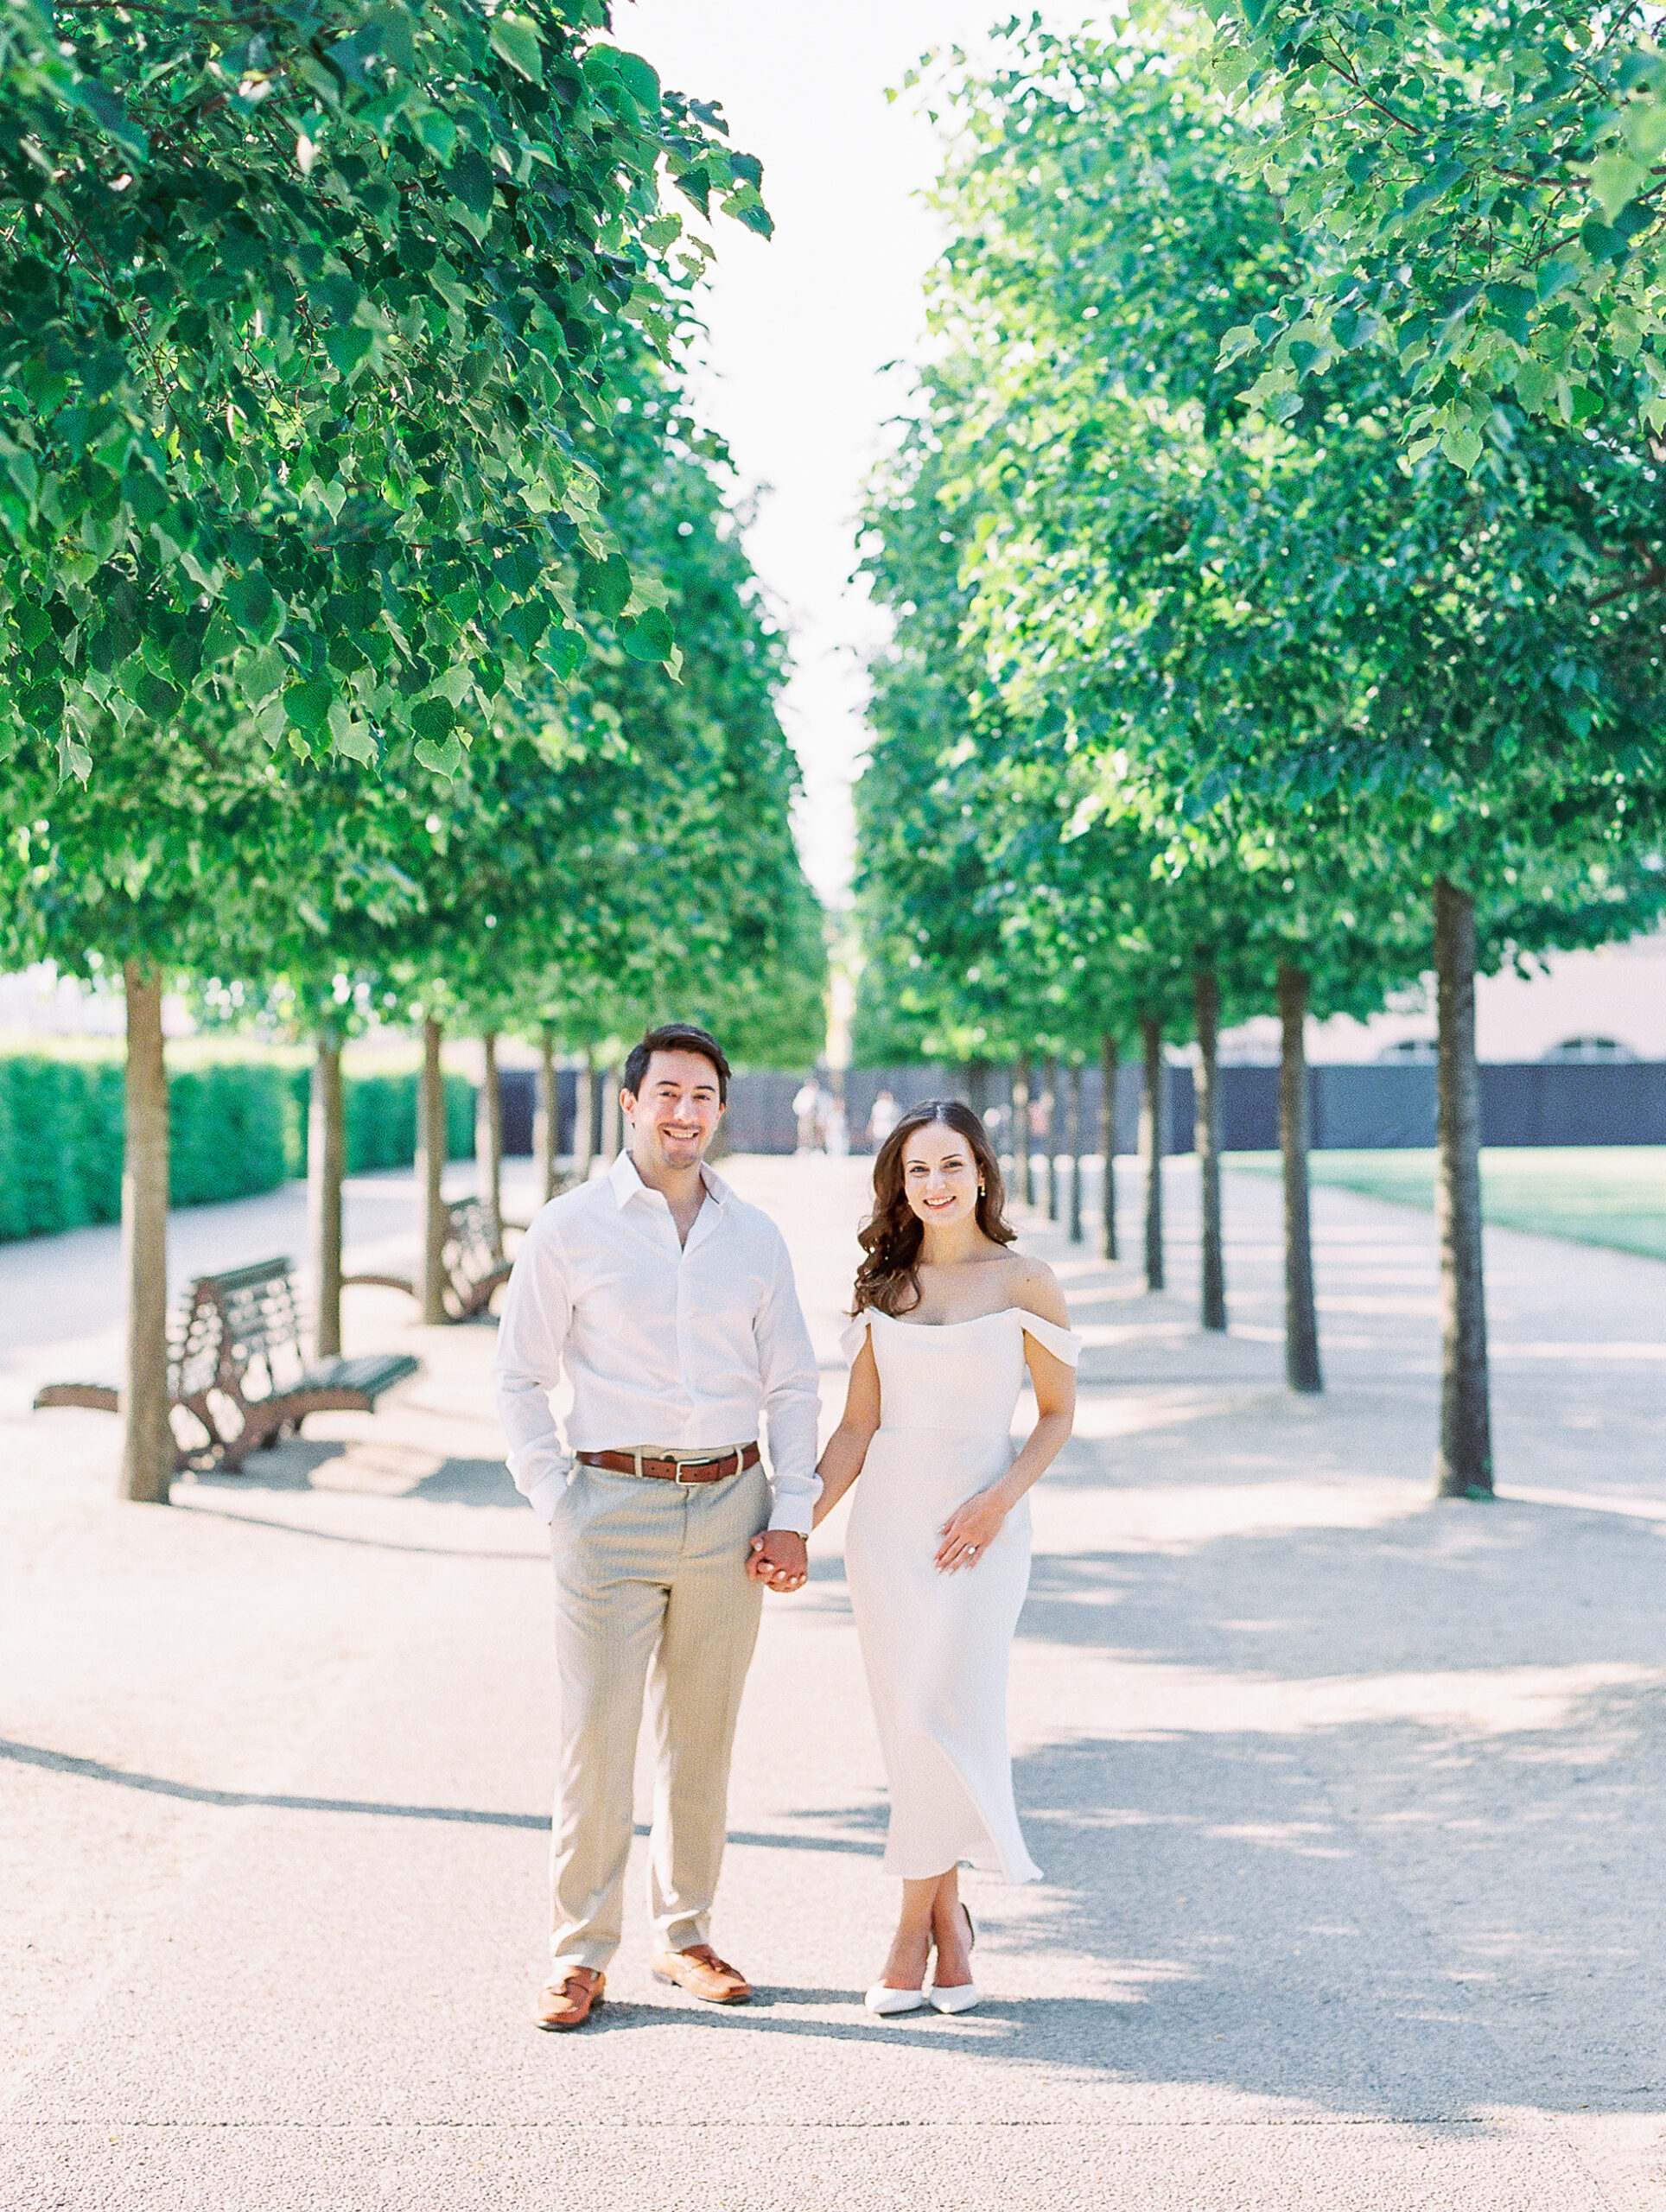 Spring Longwood Gardens Engagement Session shot on film by destination wedding photographer Katie Trauffer - couple stands hand in hand on tree lined path